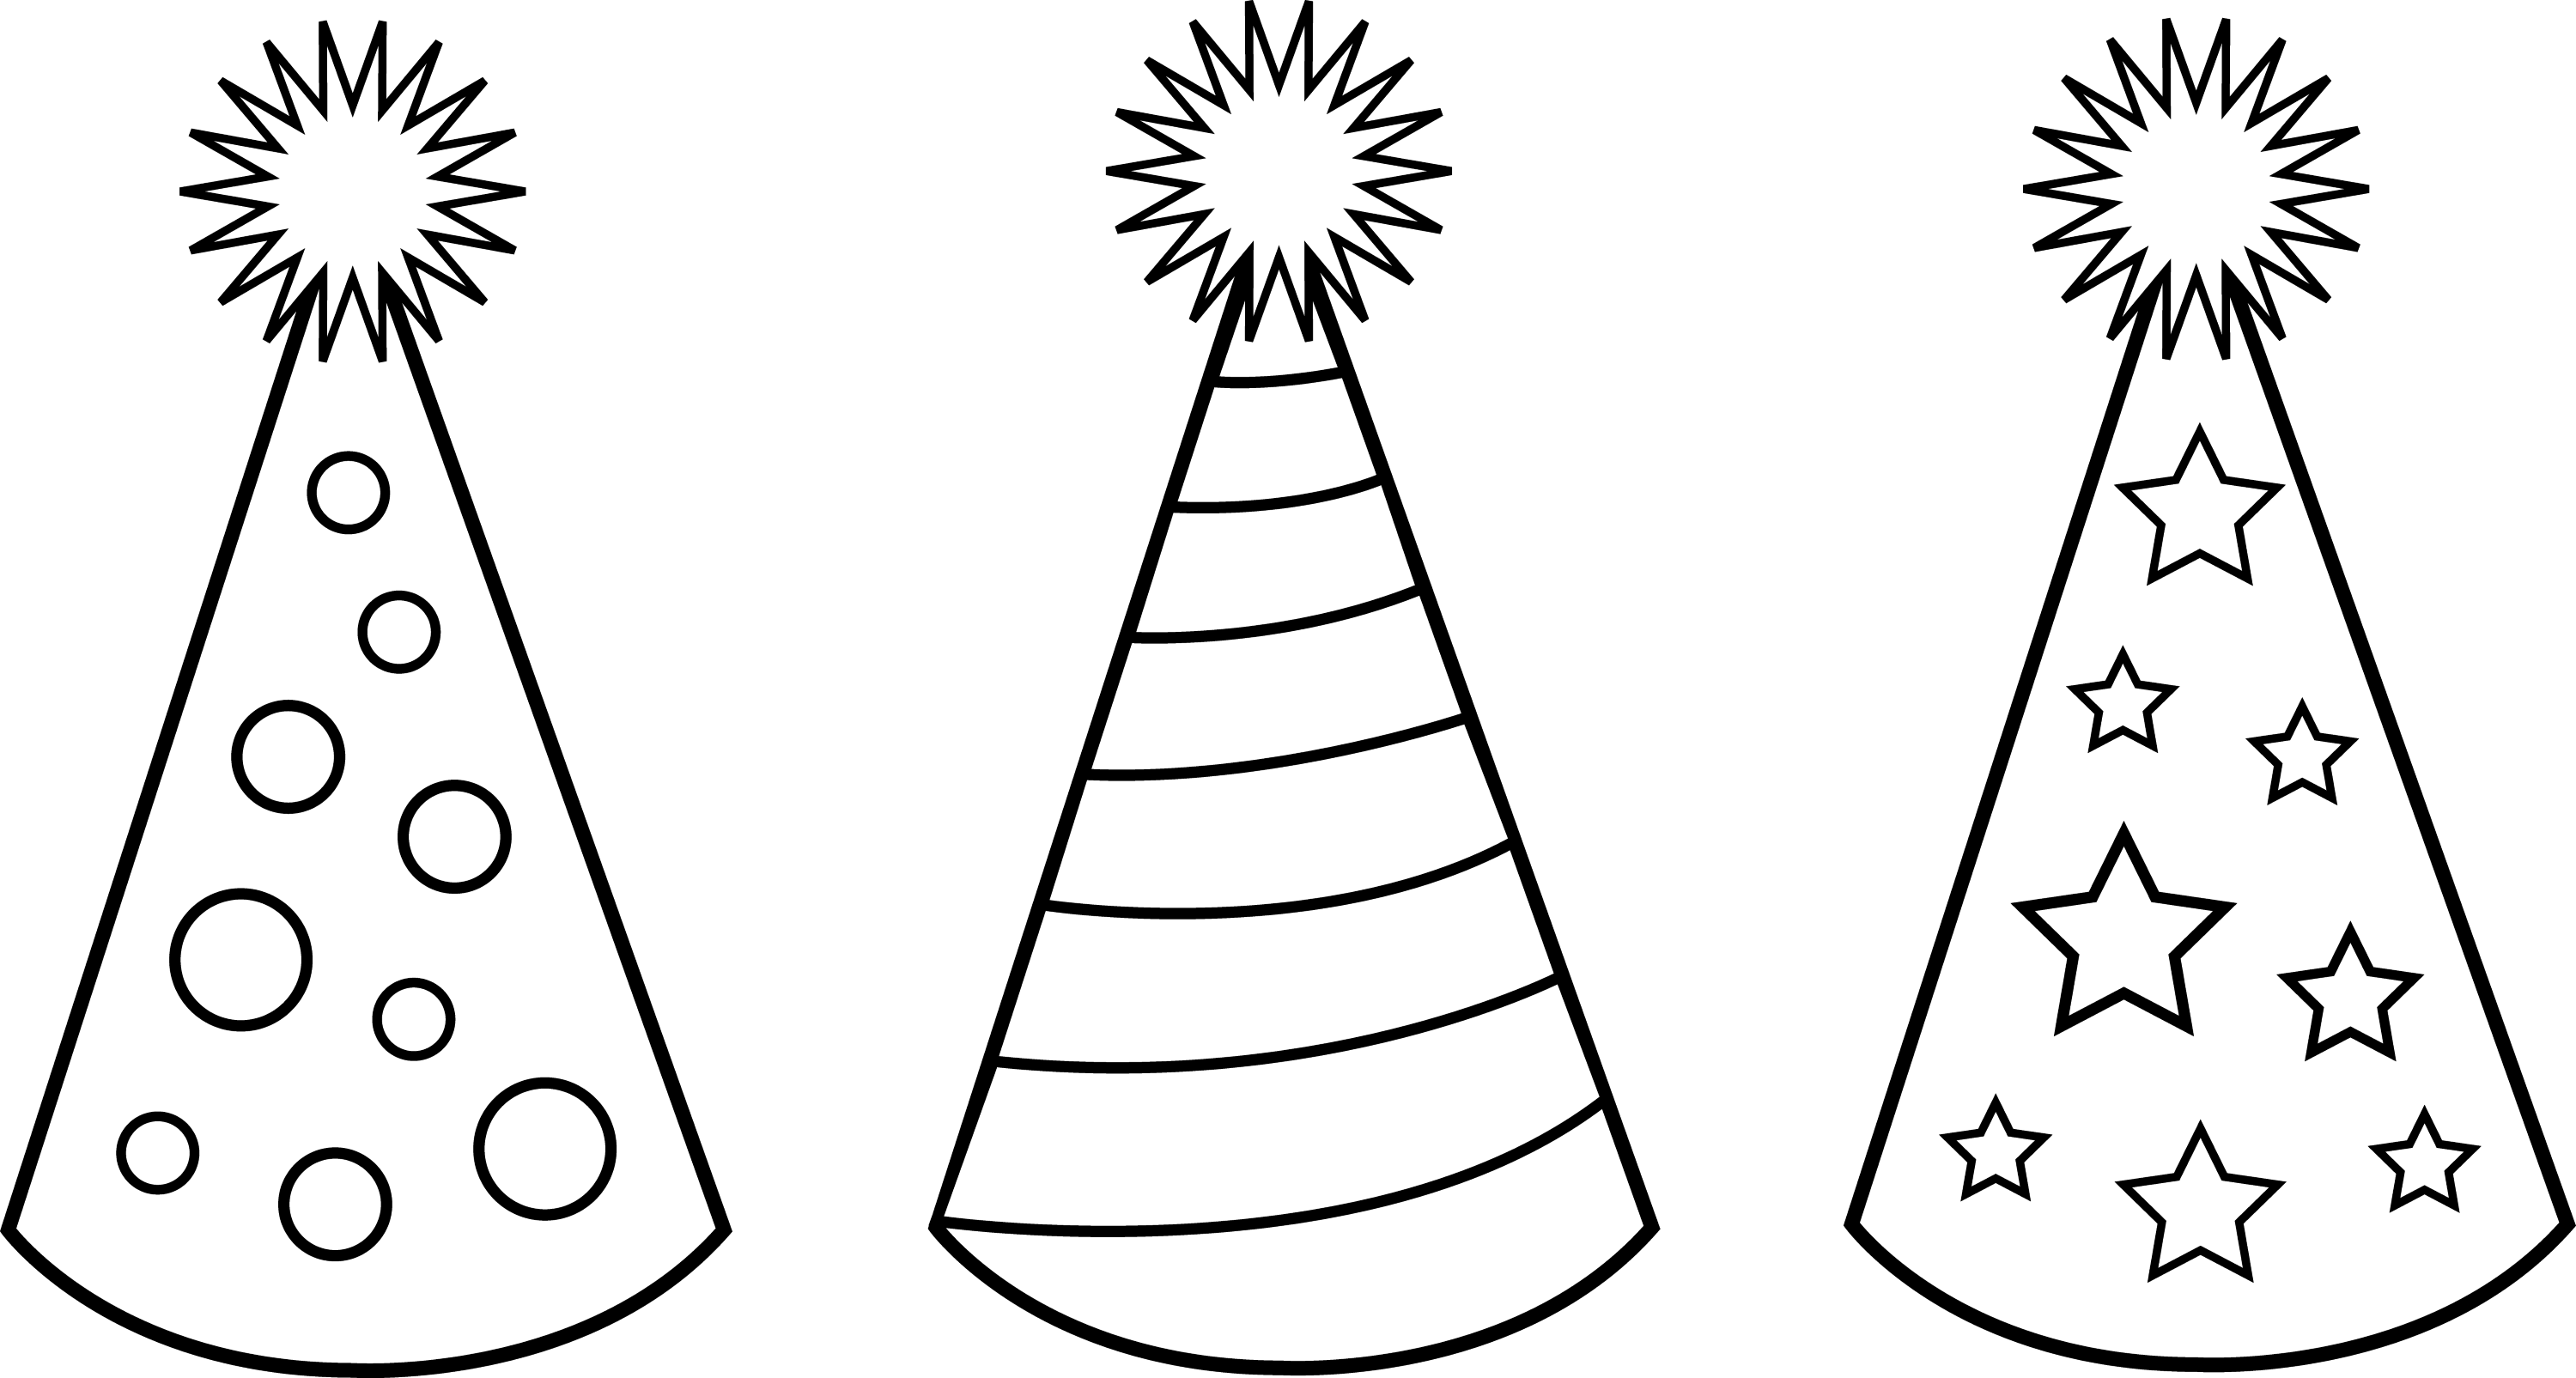 party hat clipart black and white - photo #9